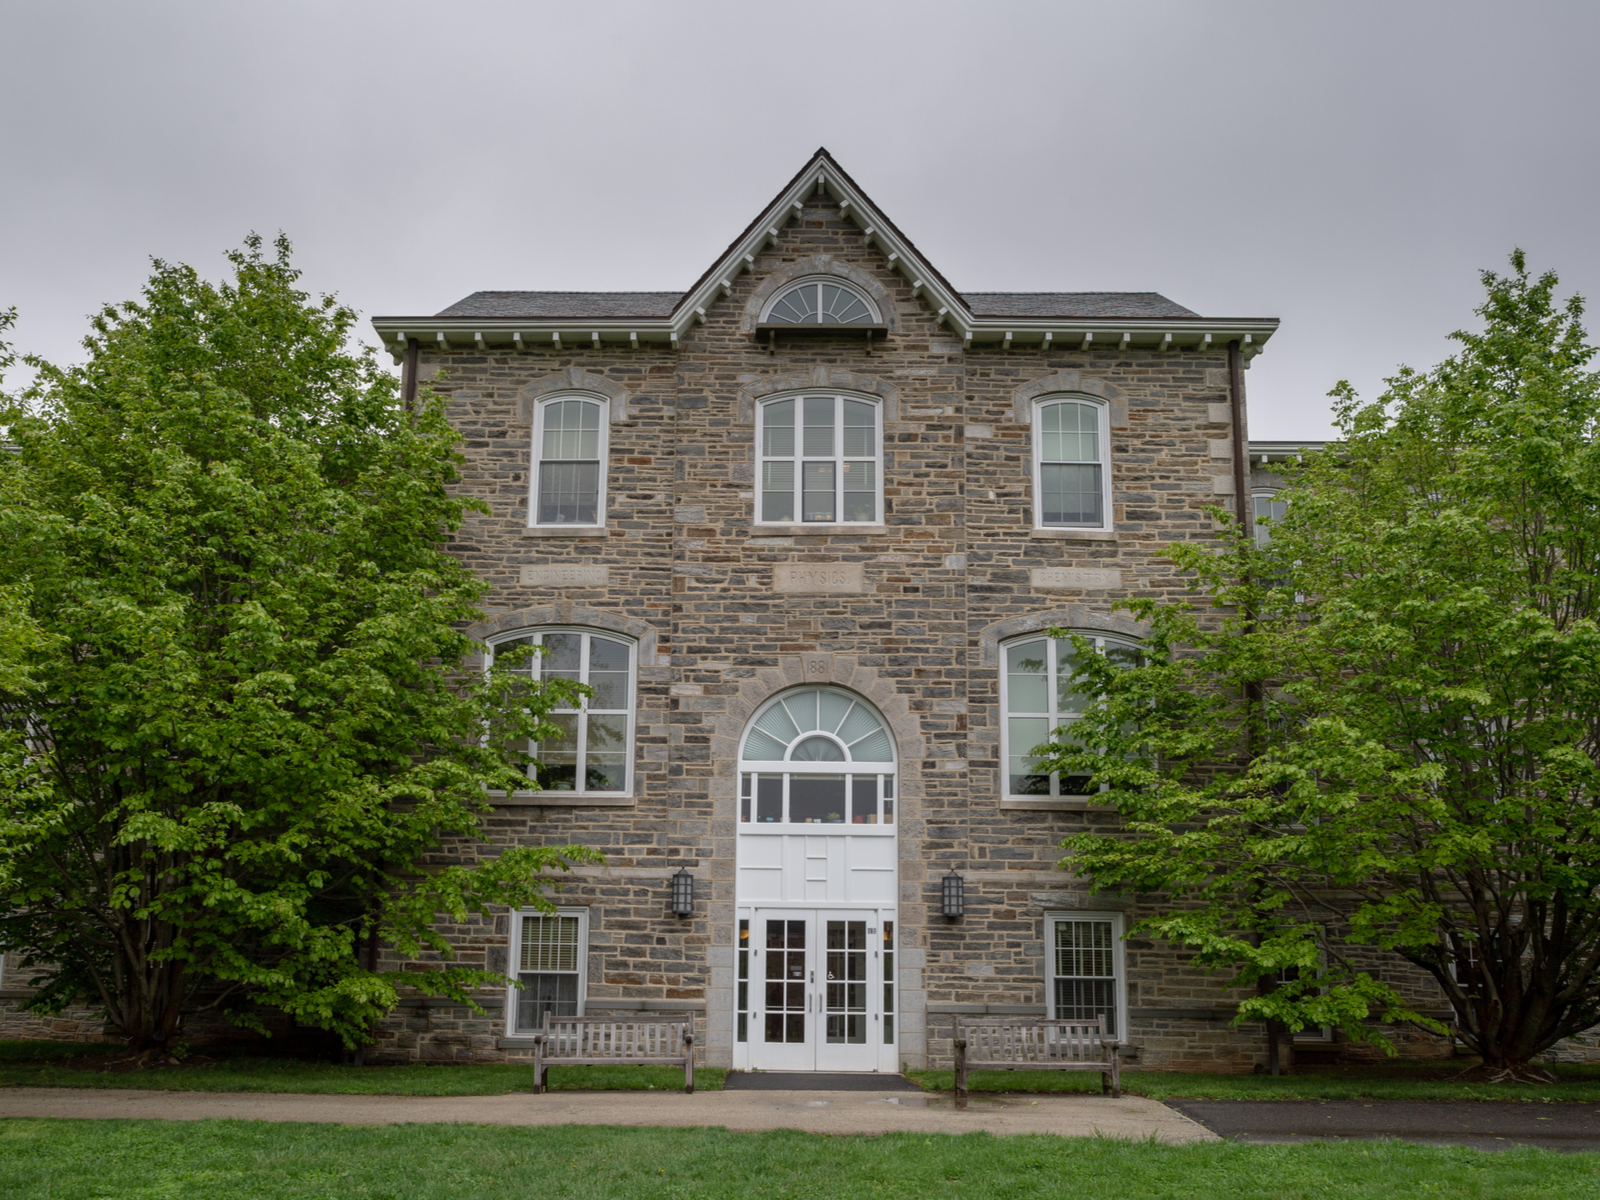 An old Physic building with glass windows and two benches in front at Swarthmore College in Pennsylvania, one of the most beautiful college campuses